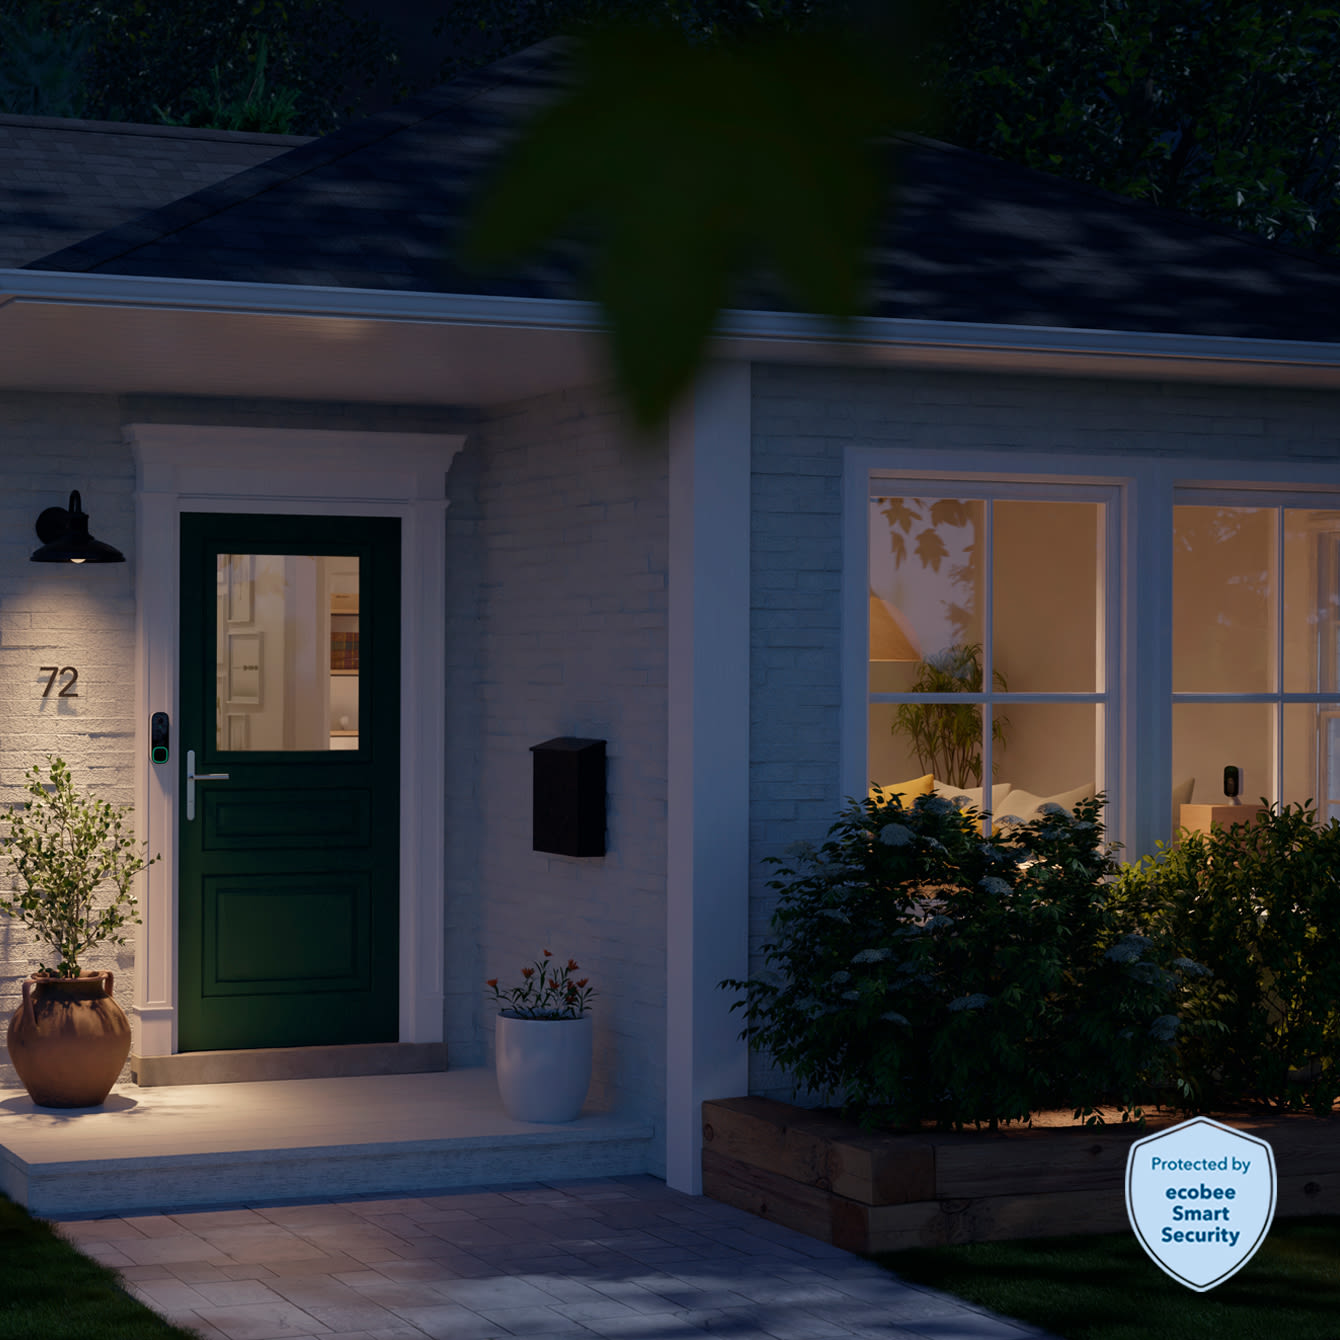 the front step of a house at night with the ecobee smart security badge